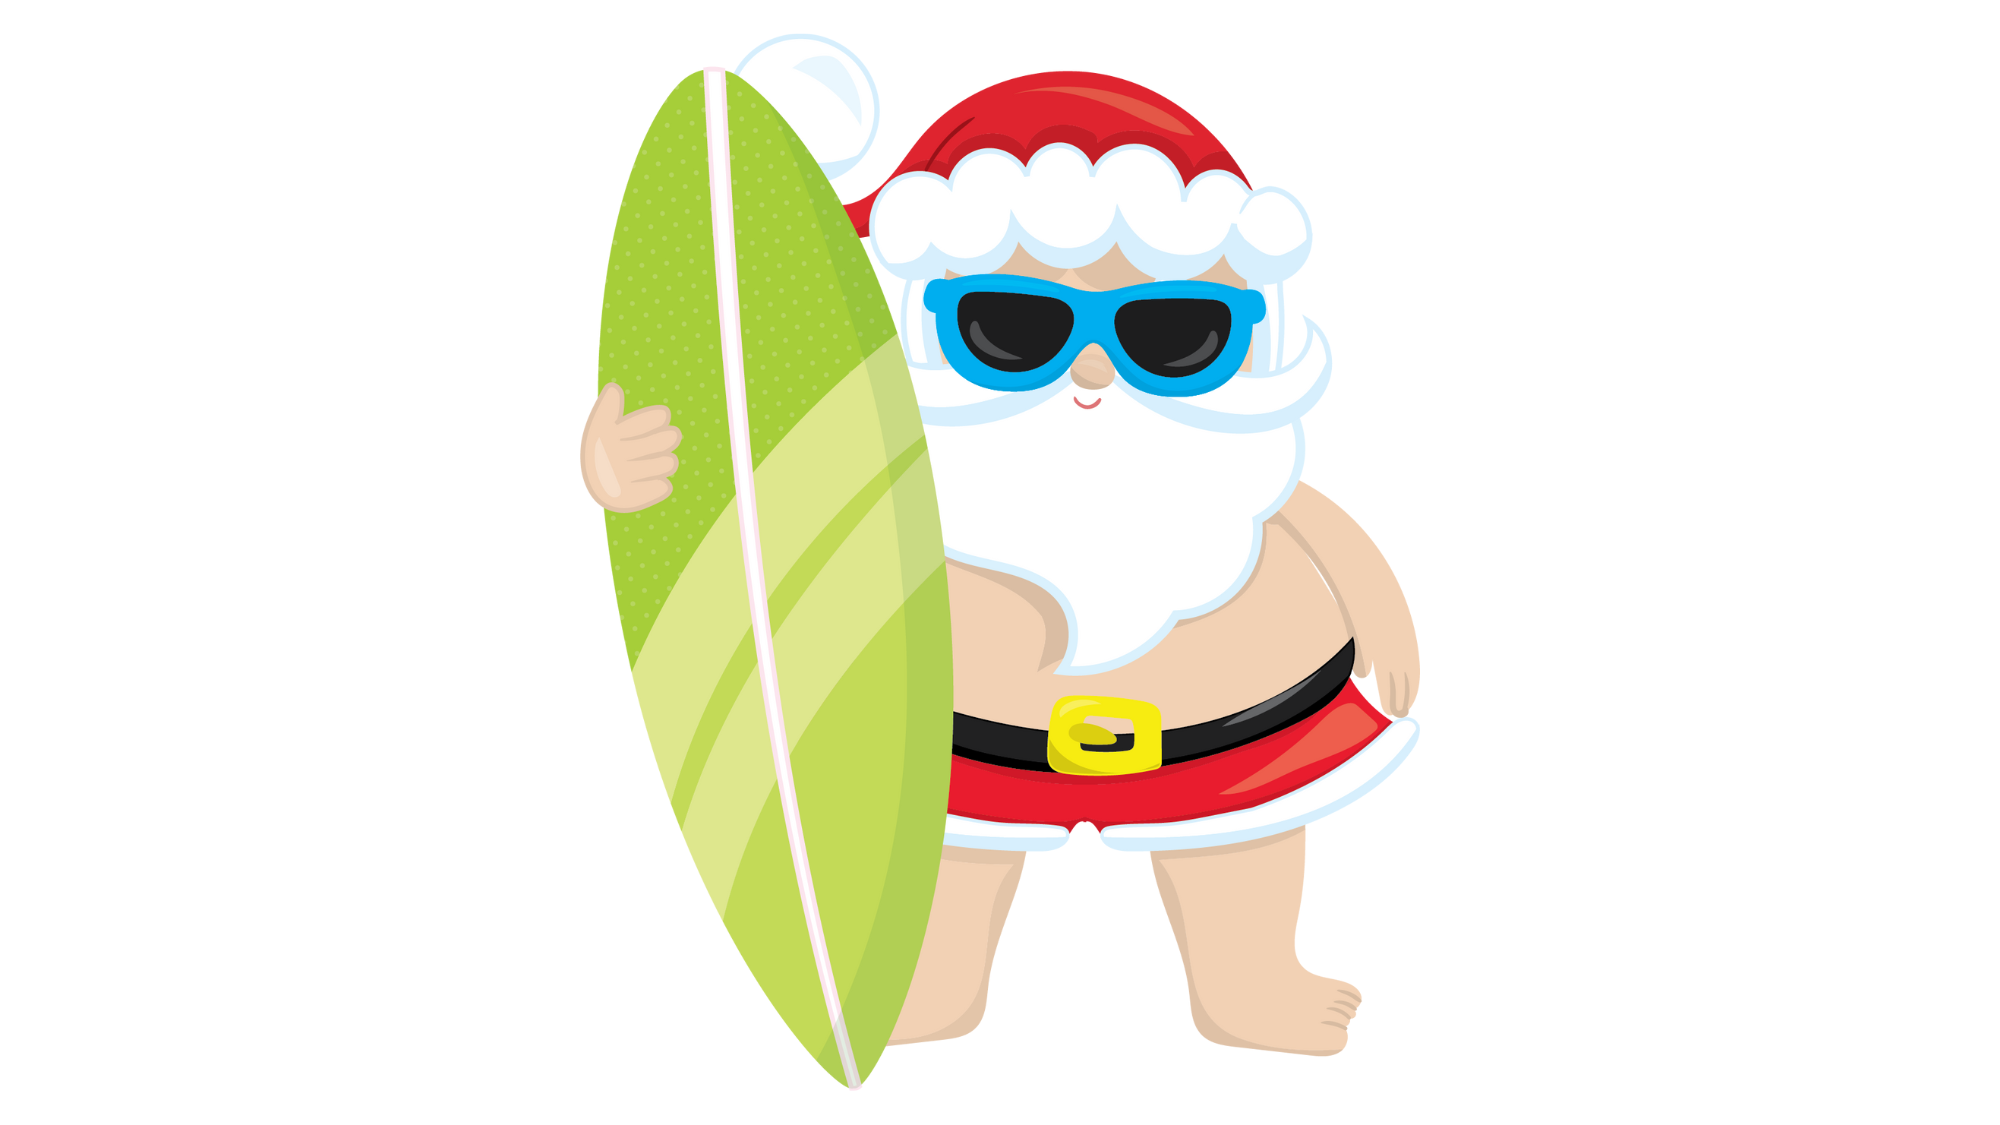 Santa-Claus-wearing-sunglasses-and-holding-a-surfboard